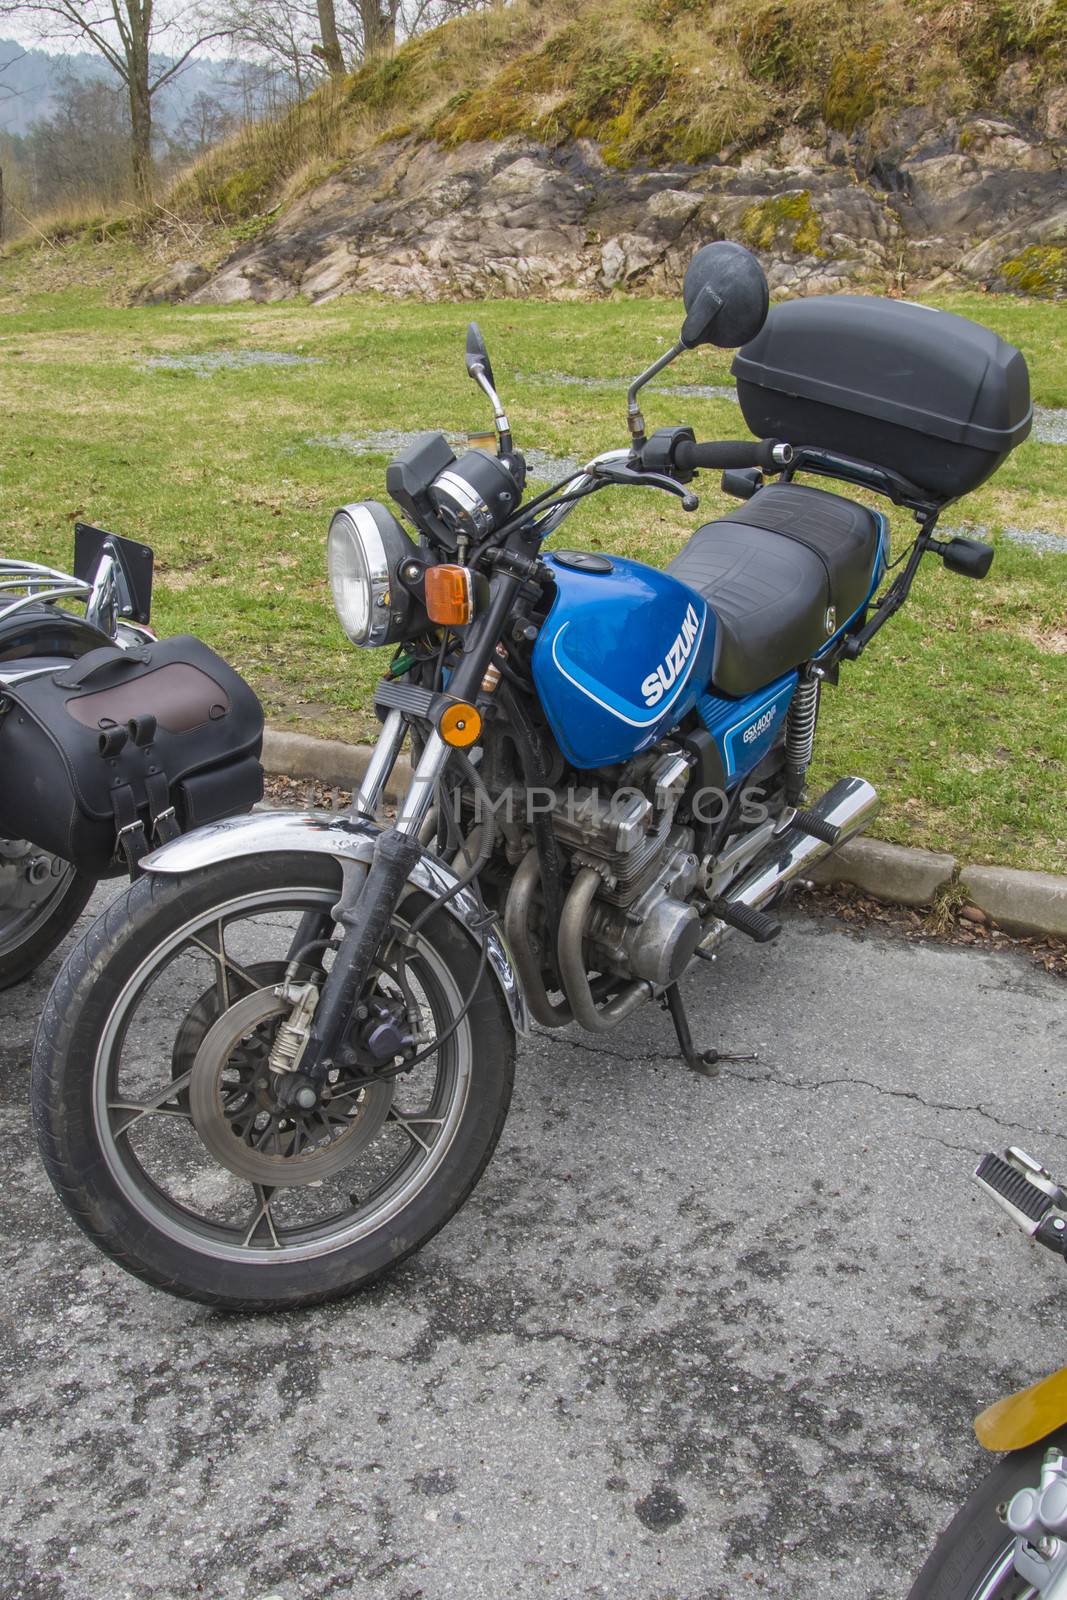 Every year in May there is a motorcycle meeting at Fredriksten fortress in Halden, Norway. In this photo Suzuki GSX 400 F 